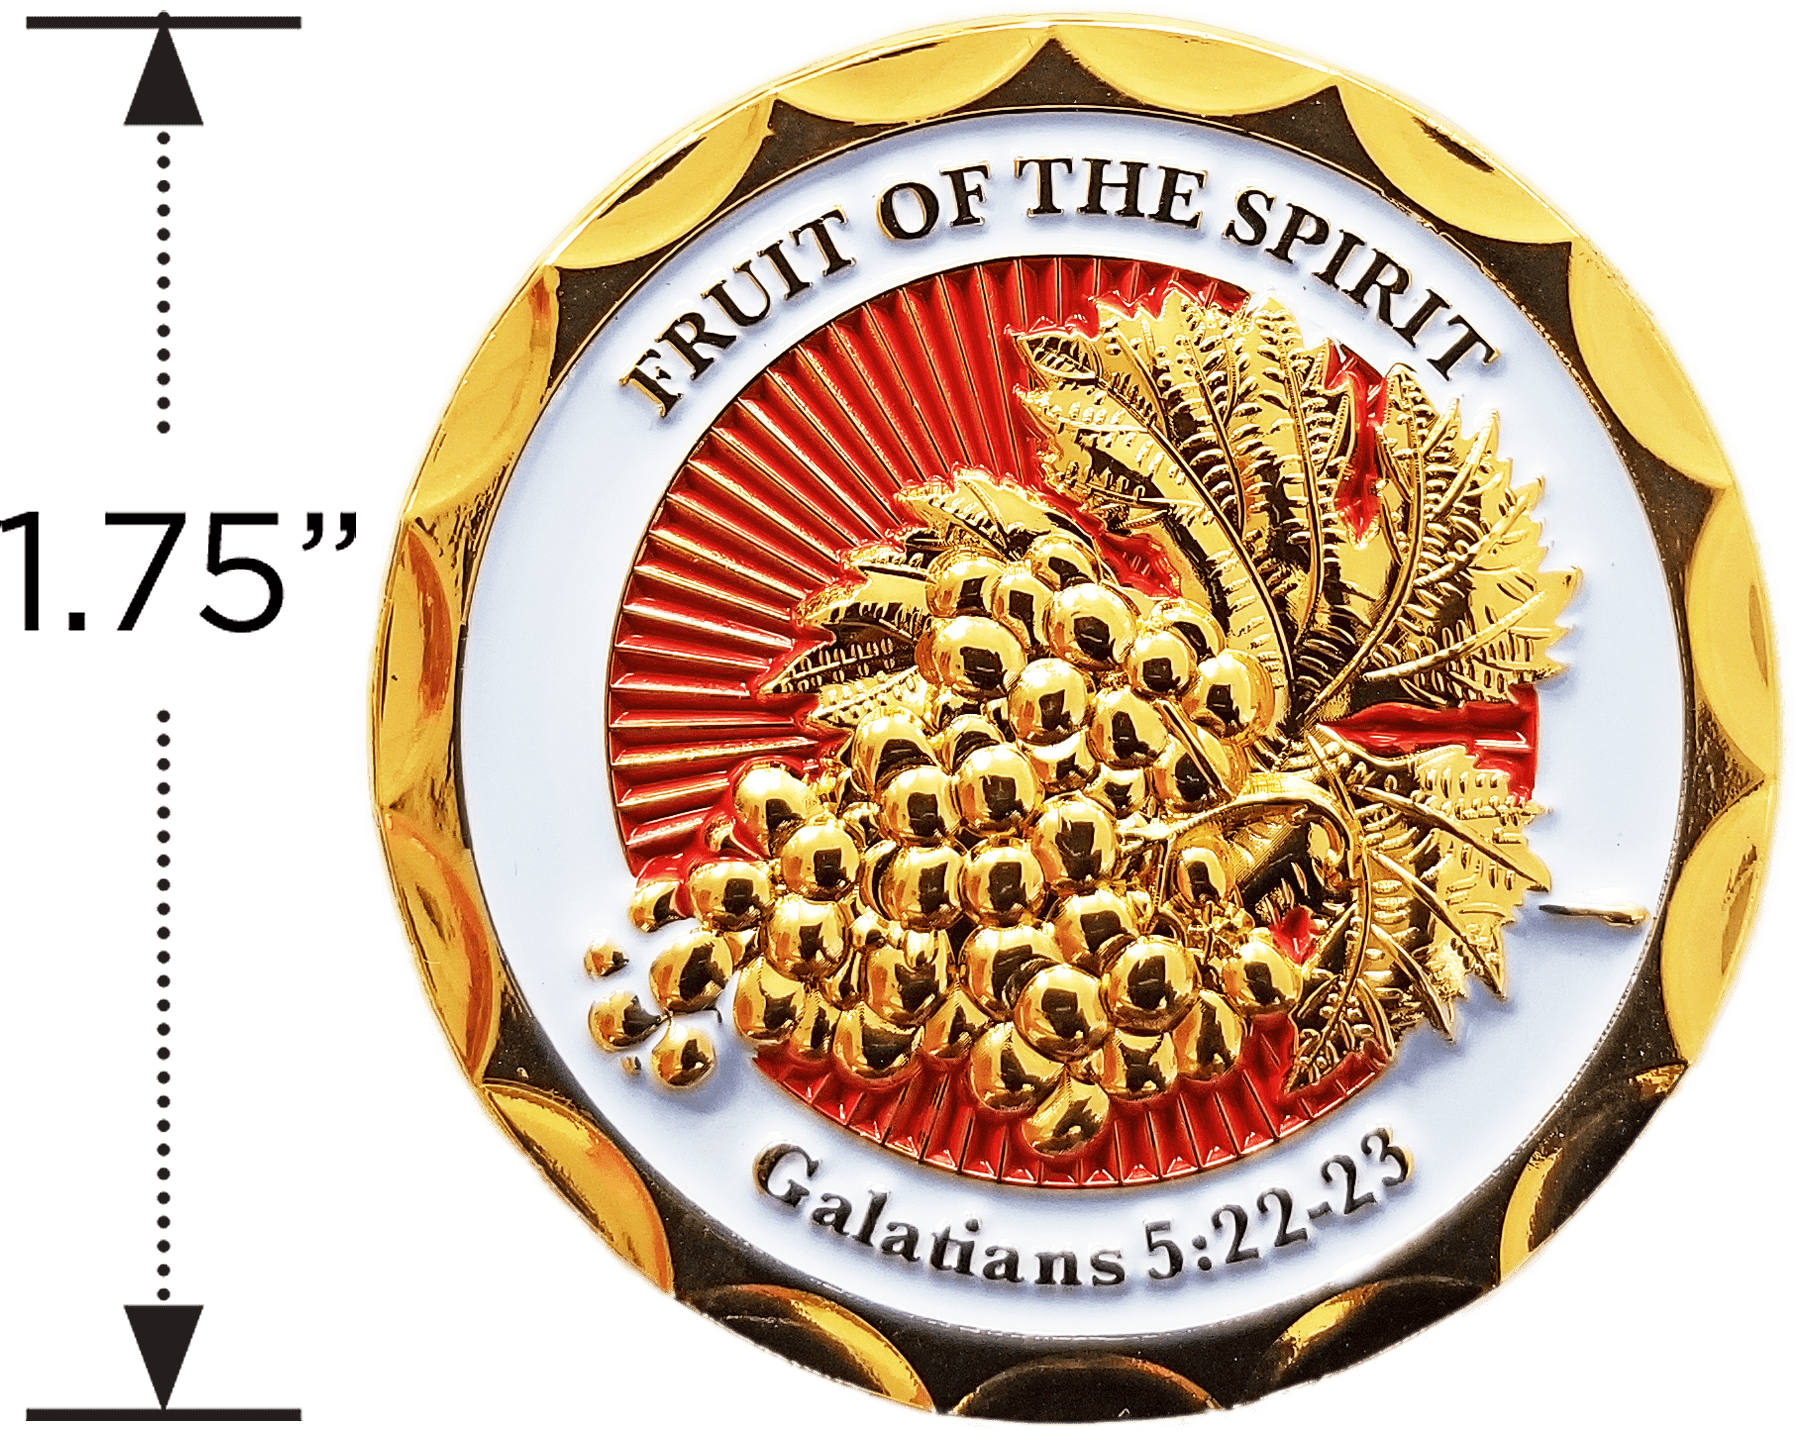 Fruit of the Spirit Gold Plated Christian Challenge Coin with size diameter measure